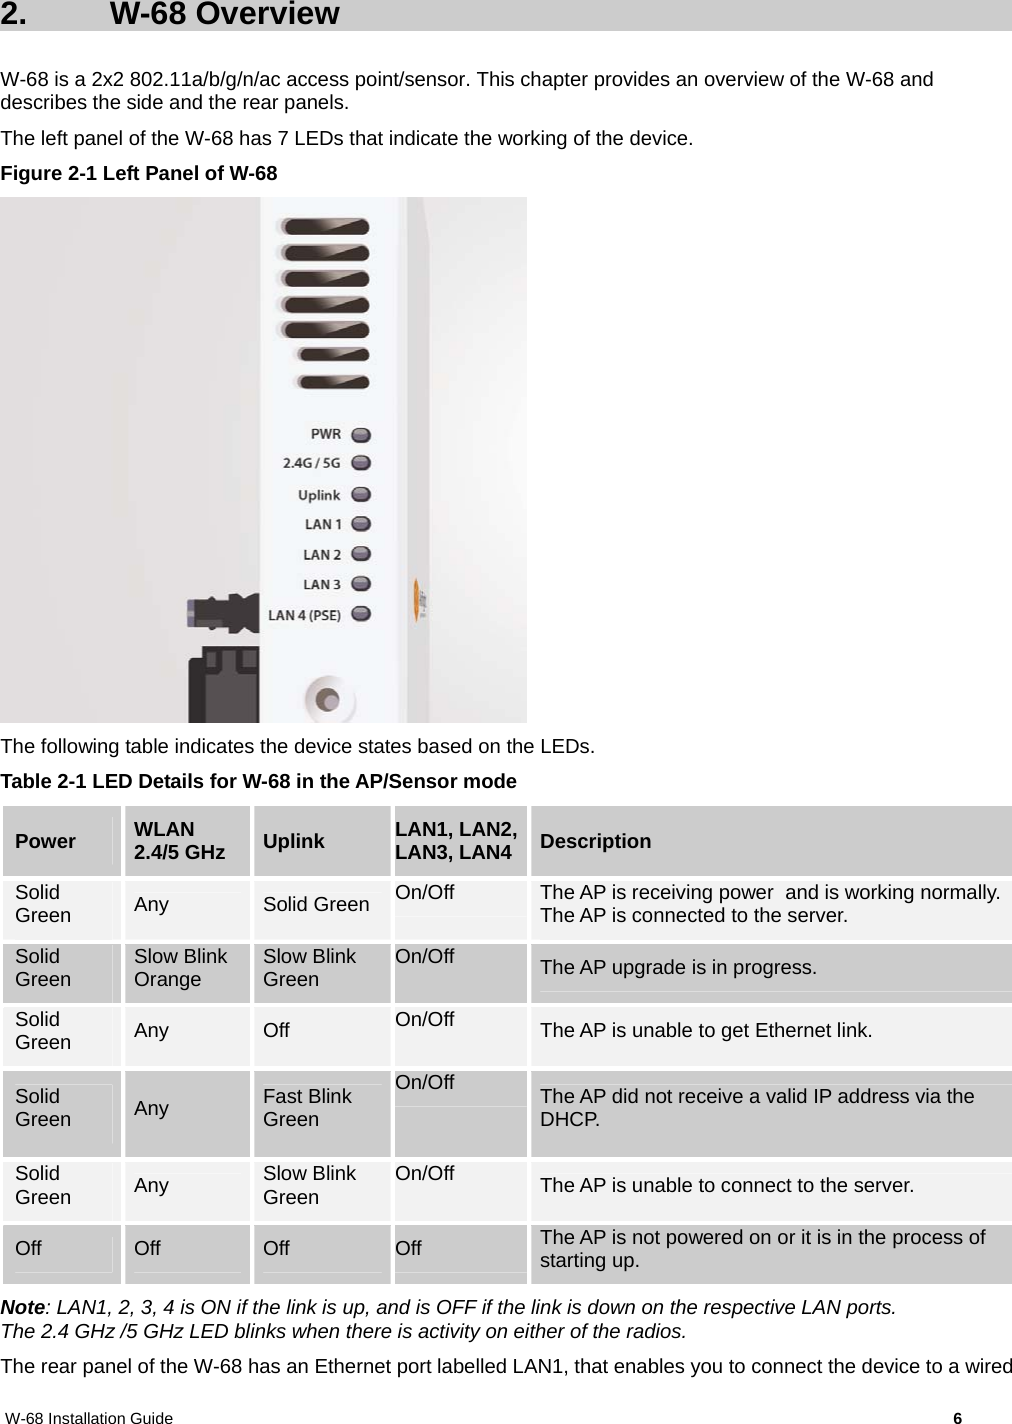 W-68 Installation Guide     6 2. W-68 Overview W-68 is a 2x2 802.11a/b/g/n/ac access point/sensor. This chapter provides an overview of the W-68 and describes the side and the rear panels. The left panel of the W-68 has 7 LEDs that indicate the working of the device. Figure 2-1 Left Panel of W-68  The following table indicates the device states based on the LEDs. Table 2-1 LED Details for W-68 in the AP/Sensor mode Power WLAN 2.4/5 GHz Uplink LAN1, LAN2, LAN3, LAN4 Description Solid Green  Any  Solid Green  On/Off  The AP is receiving power  and is working normally. The AP is connected to the server.  Solid Green  Slow Blink Orange  Slow Blink Green  On/Off  The AP upgrade is in progress. Solid Green  Any  Off  On/Off  The AP is unable to get Ethernet link. Solid Green  Any  Fast Blink Green On/Off  The AP did not receive a valid IP address via the DHCP.  Solid Green  Any  Slow Blink Green  On/Off  The AP is unable to connect to the server. Off  Off  Off  Off  The AP is not powered on or it is in the process of starting up. Note: LAN1, 2, 3, 4 is ON if the link is up, and is OFF if the link is down on the respective LAN ports.  The 2.4 GHz /5 GHz LED blinks when there is activity on either of the radios. The rear panel of the W-68 has an Ethernet port labelled LAN1, that enables you to connect the device to a wired 